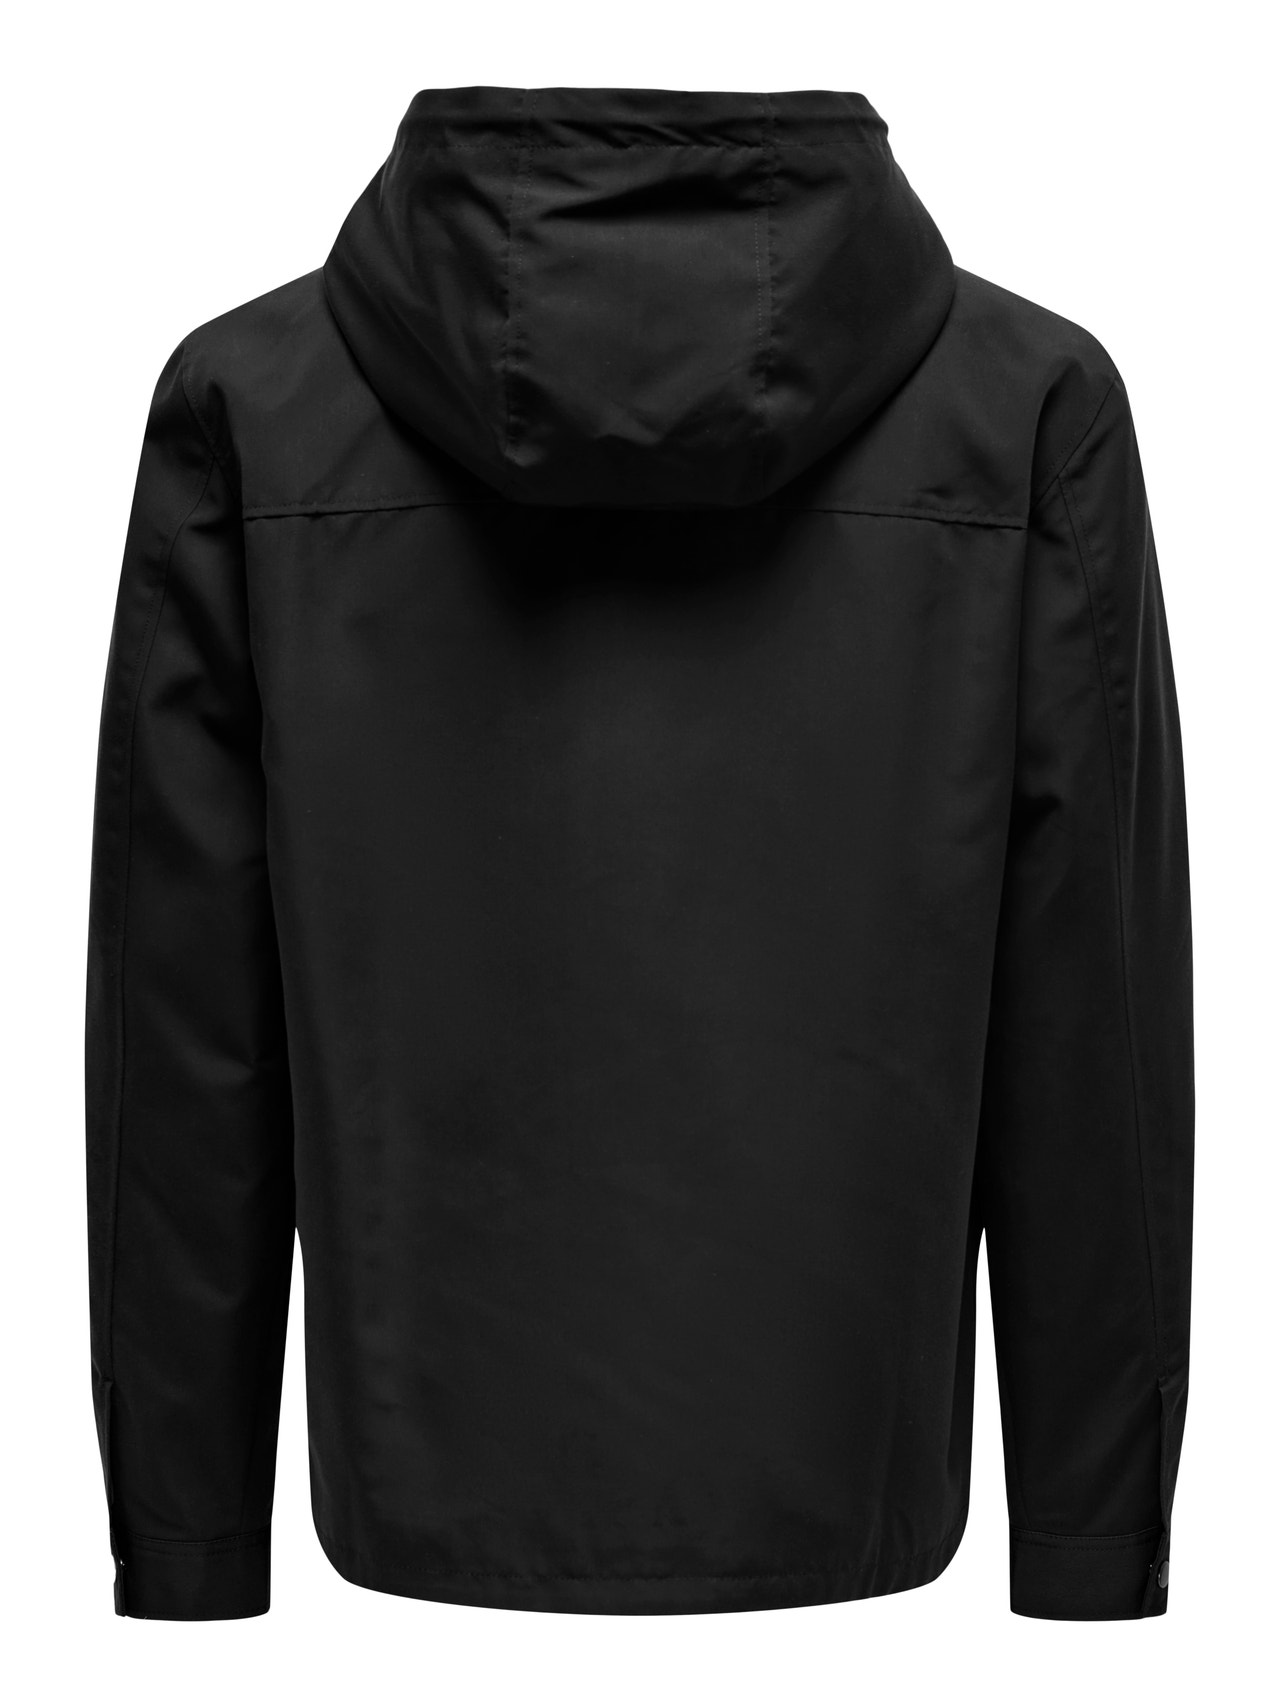 ONLY & SONS Jacket with hood -Black - 22024156